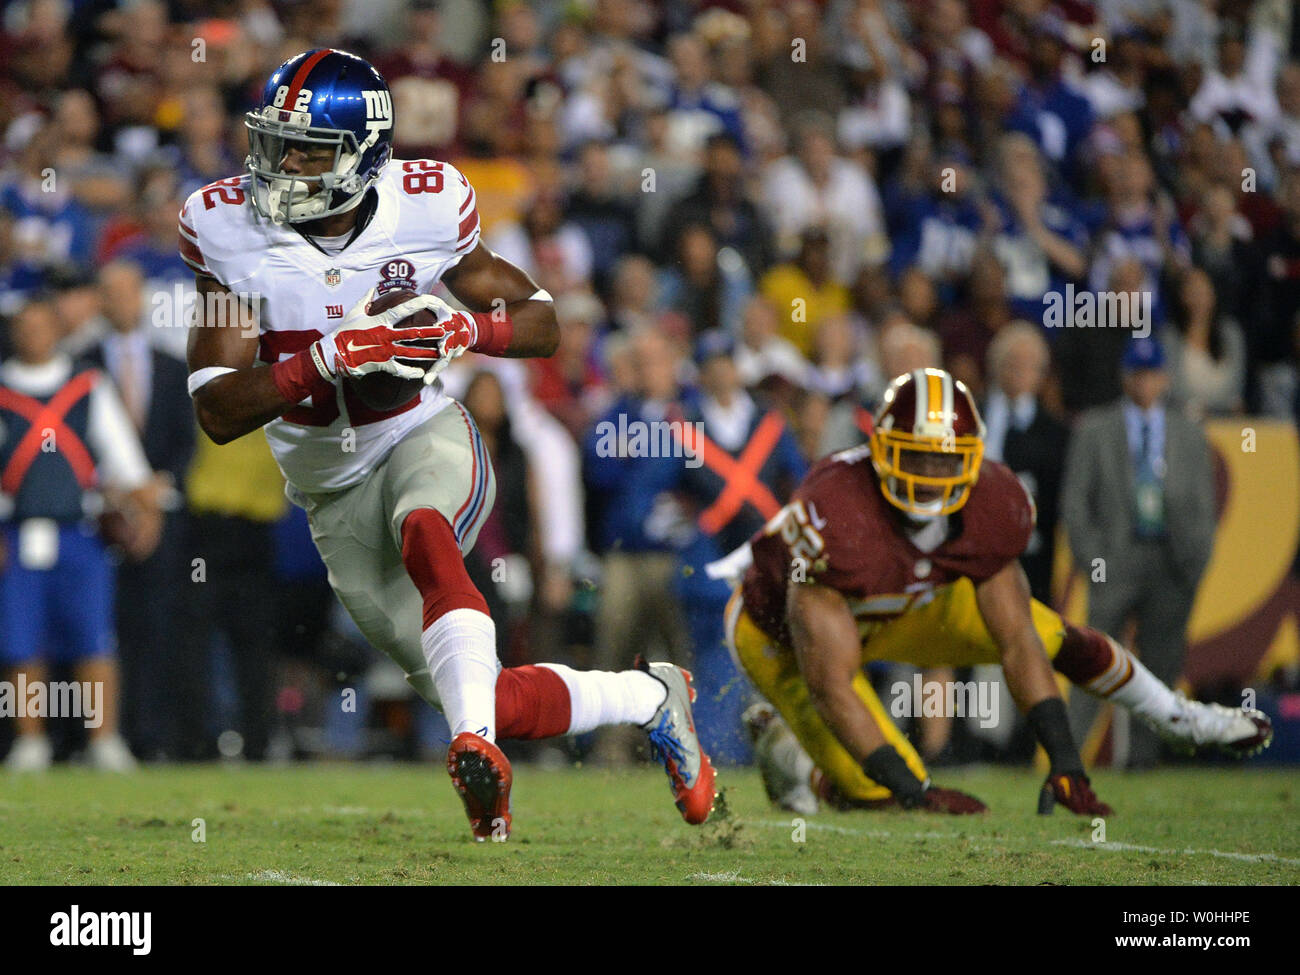 New York Giants wide receiver Rueben Randle (82) runs brings in a pass against Washington Redskins inside linebacker Keenan Robinson (52) in the second quarter at FedEx Field in Washington, D.C. on September 25, 2014. UPI/Kevin Dietsch Stock Photo